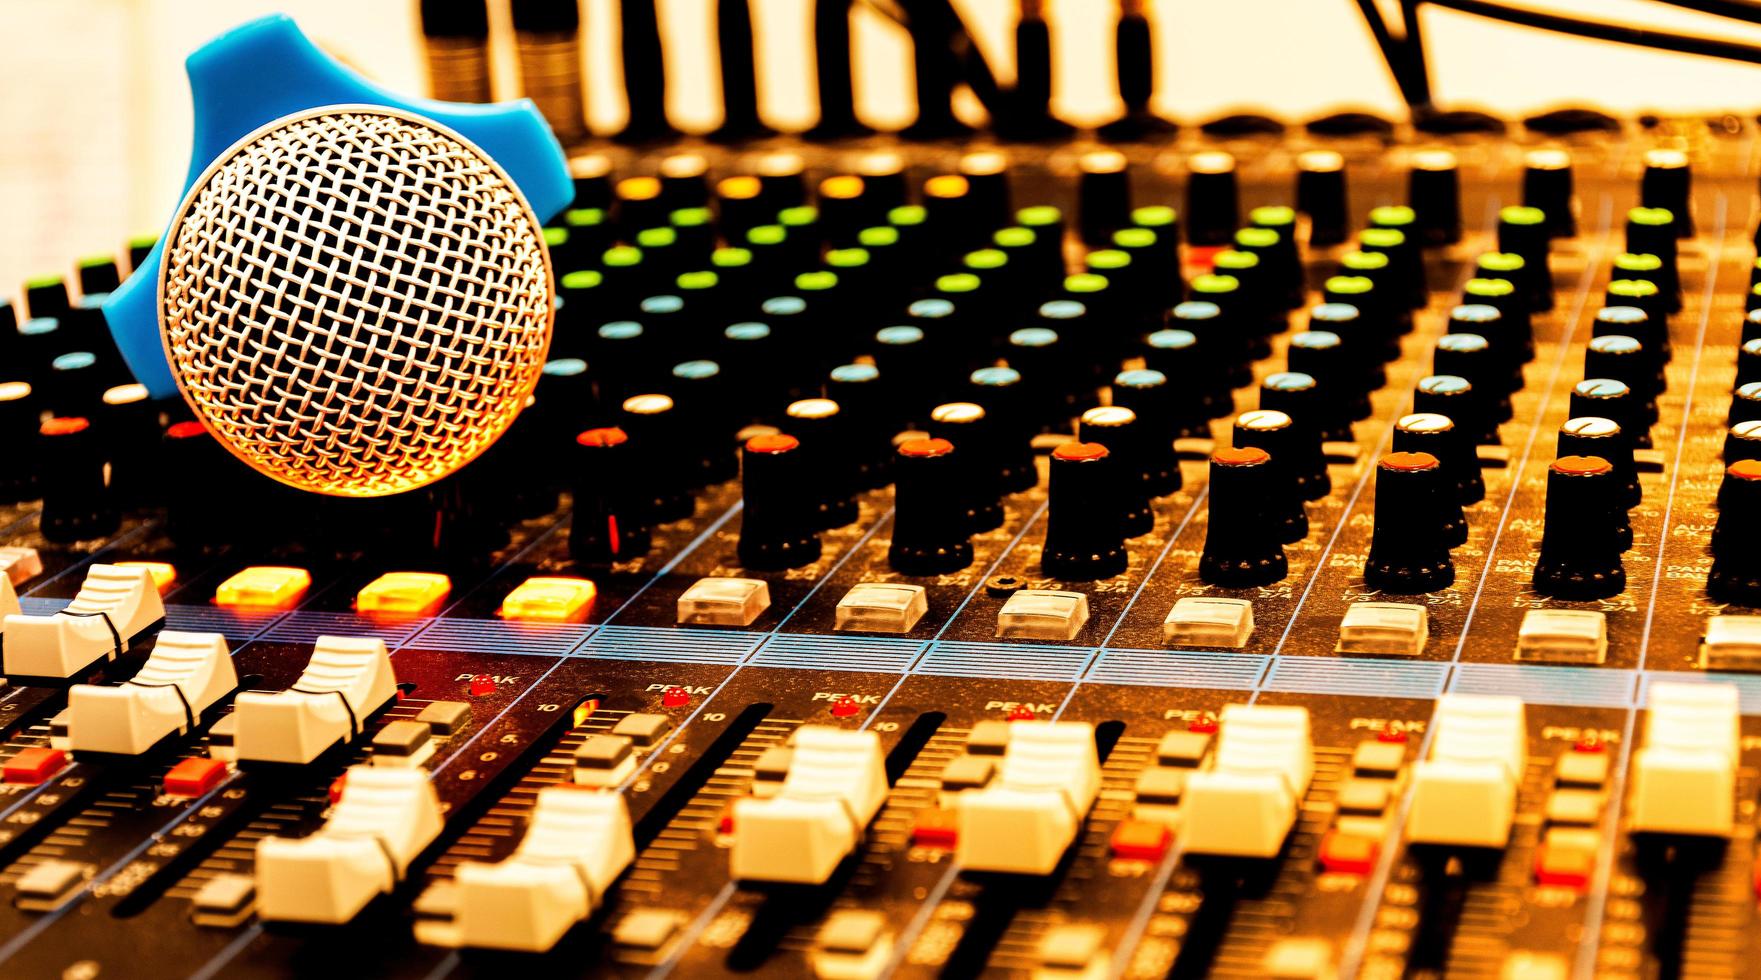 Microphone on console sound board mixer photo